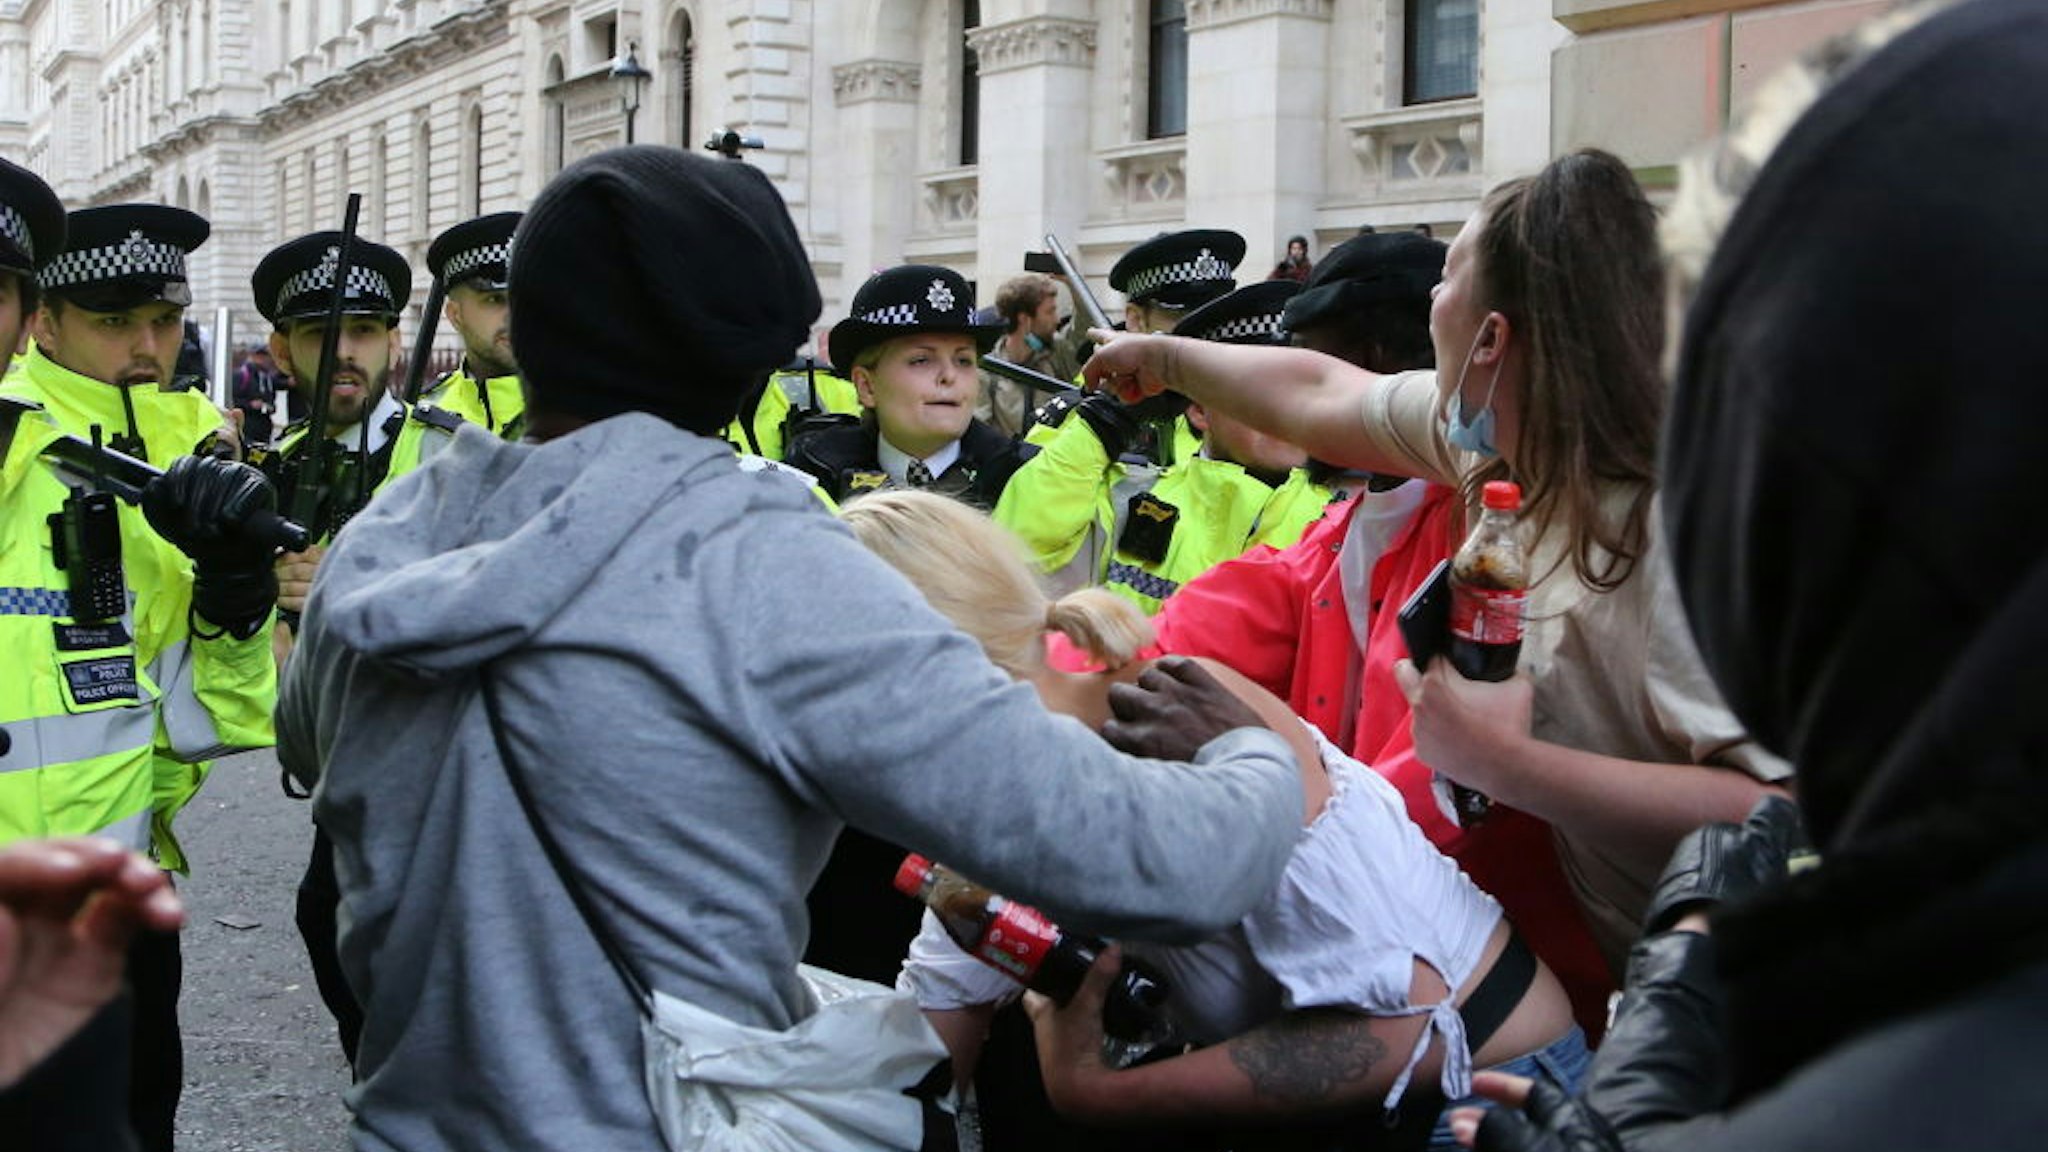 Police officers intervene in demonstrators during a protest in solidarity with U.S. anti-racism demonstrations after George Floyd's death, outside Downing Street in London, United Kingdom on June 07, 2020. (Photo by Ilyas Tayfun Salci/Anadolu Agency via Getty Images)